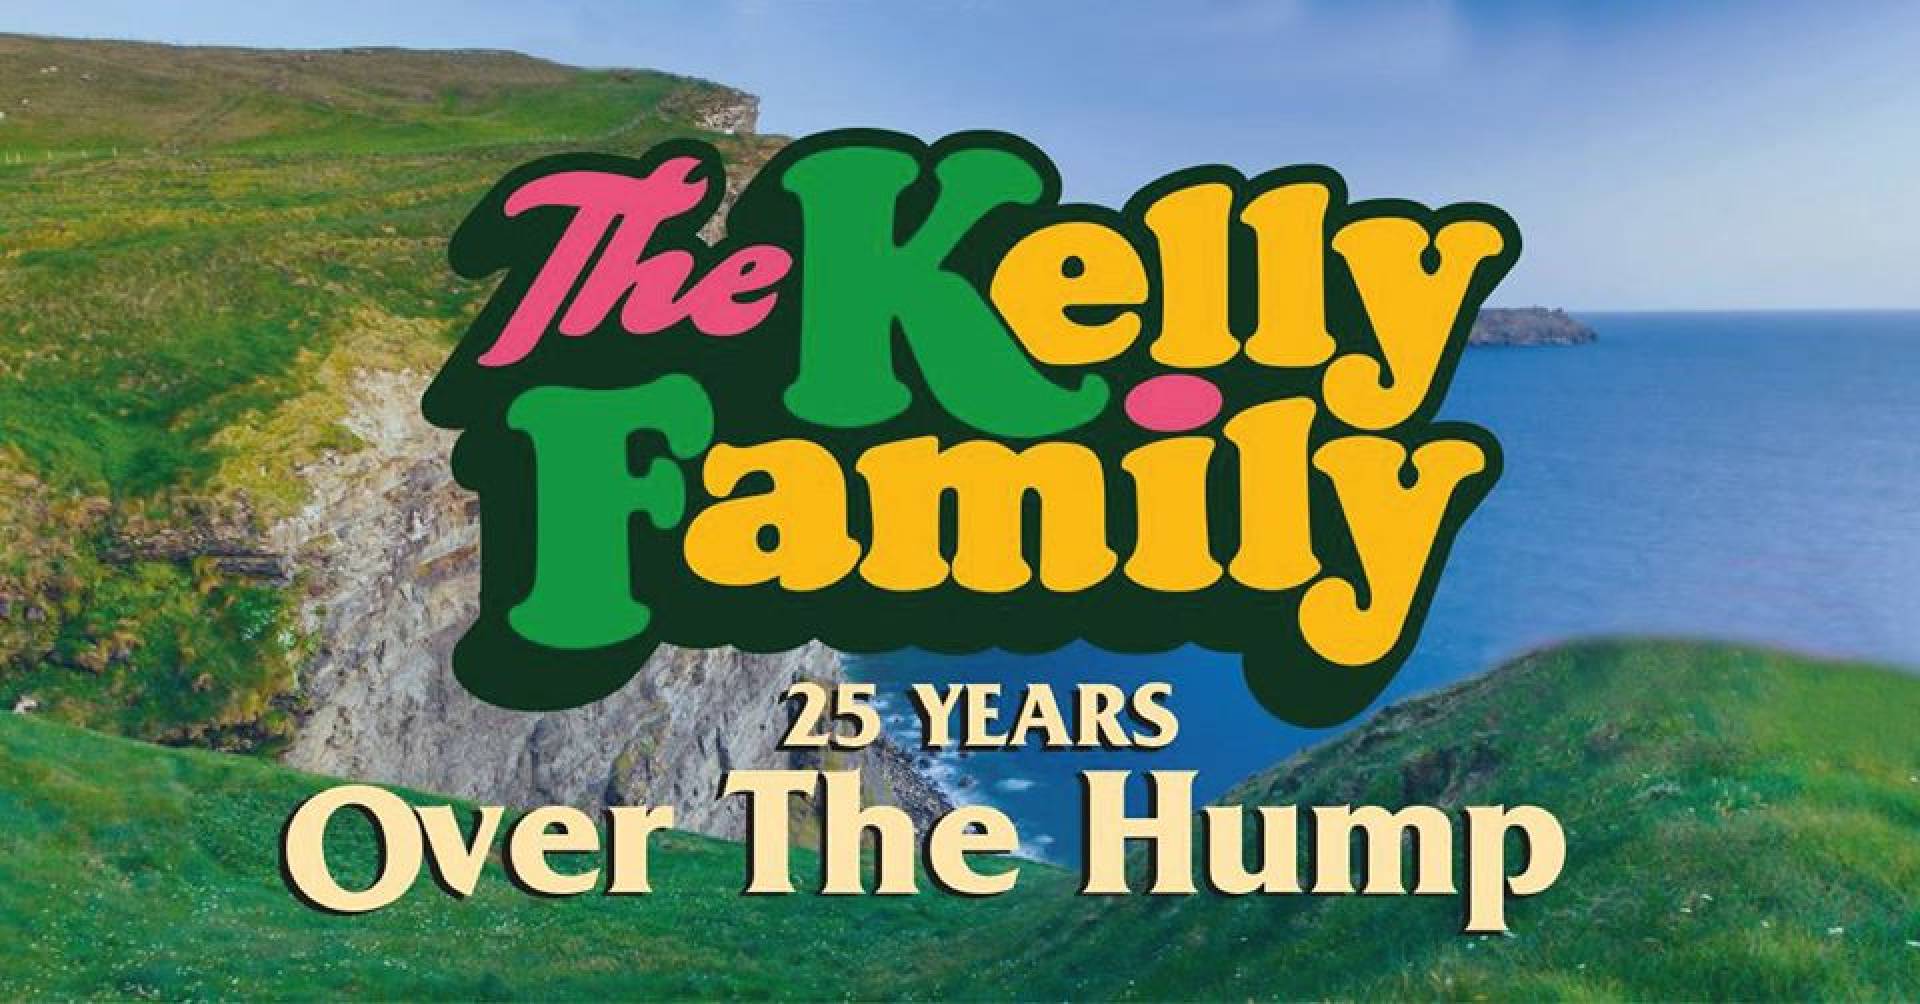 The Kelly Family „25 Years - Over the hump"